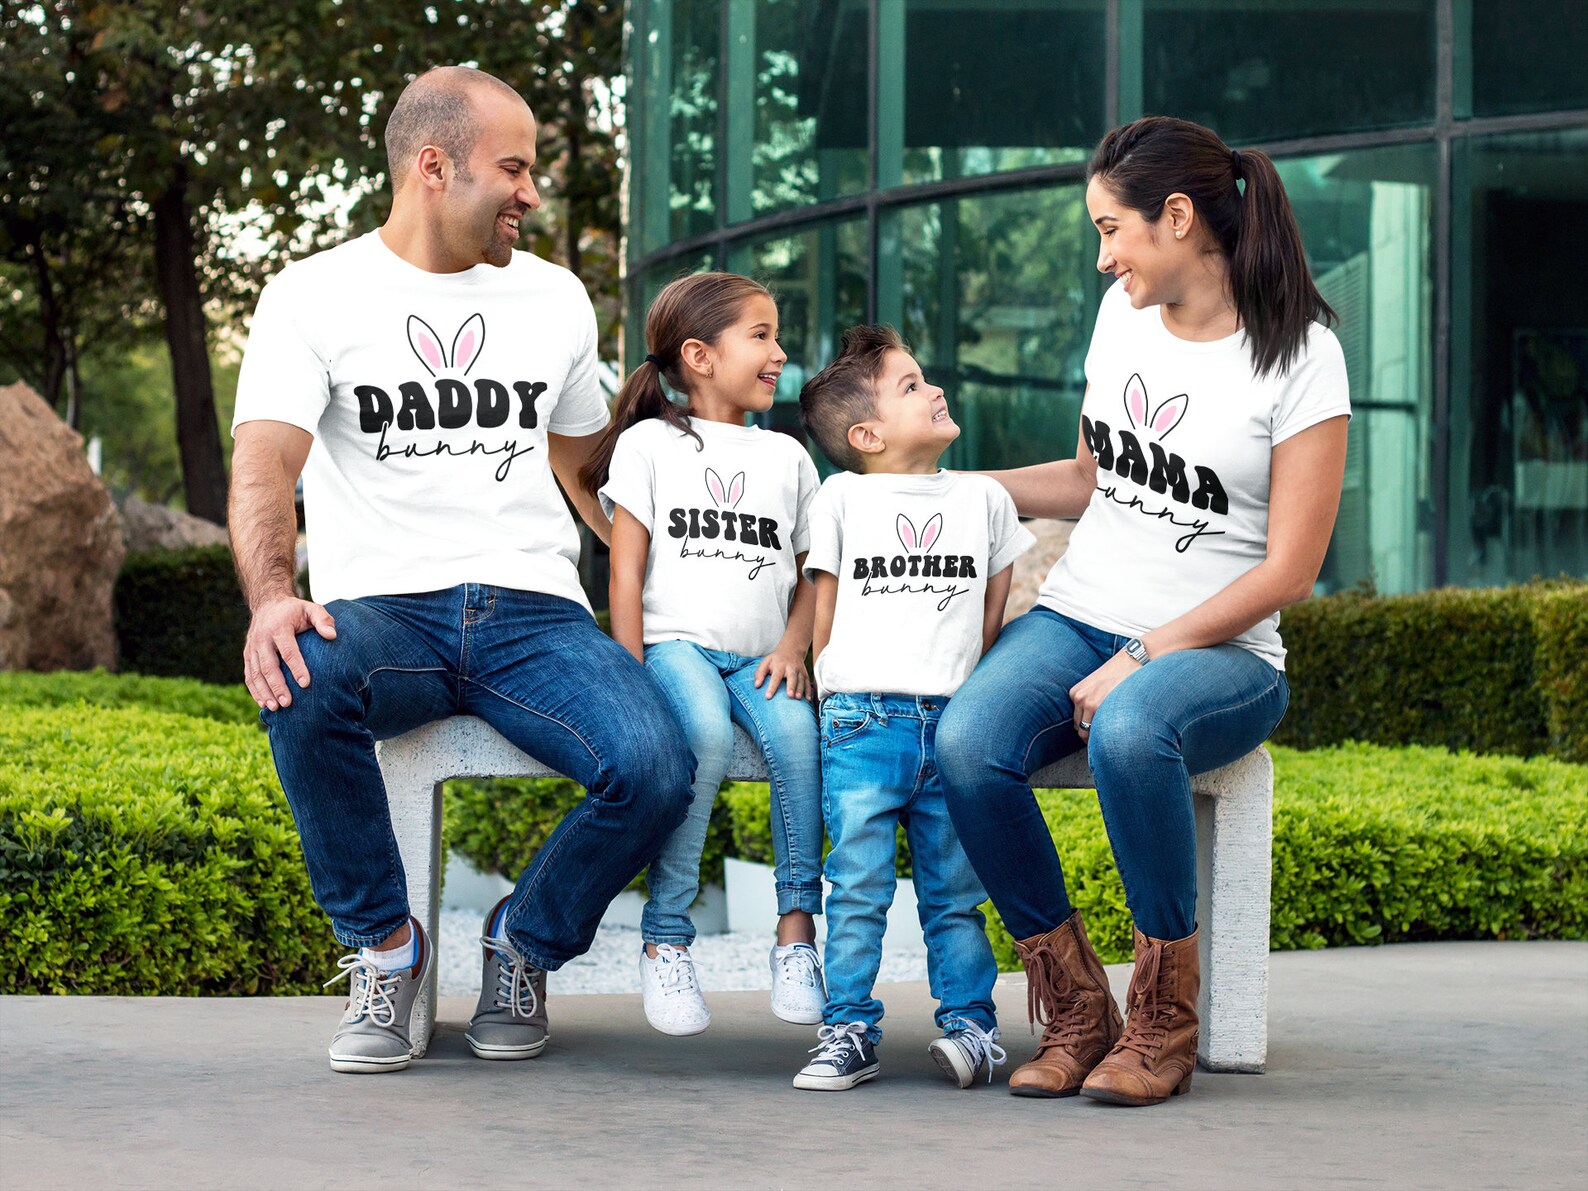 Personalised Family Bunny T-shirts